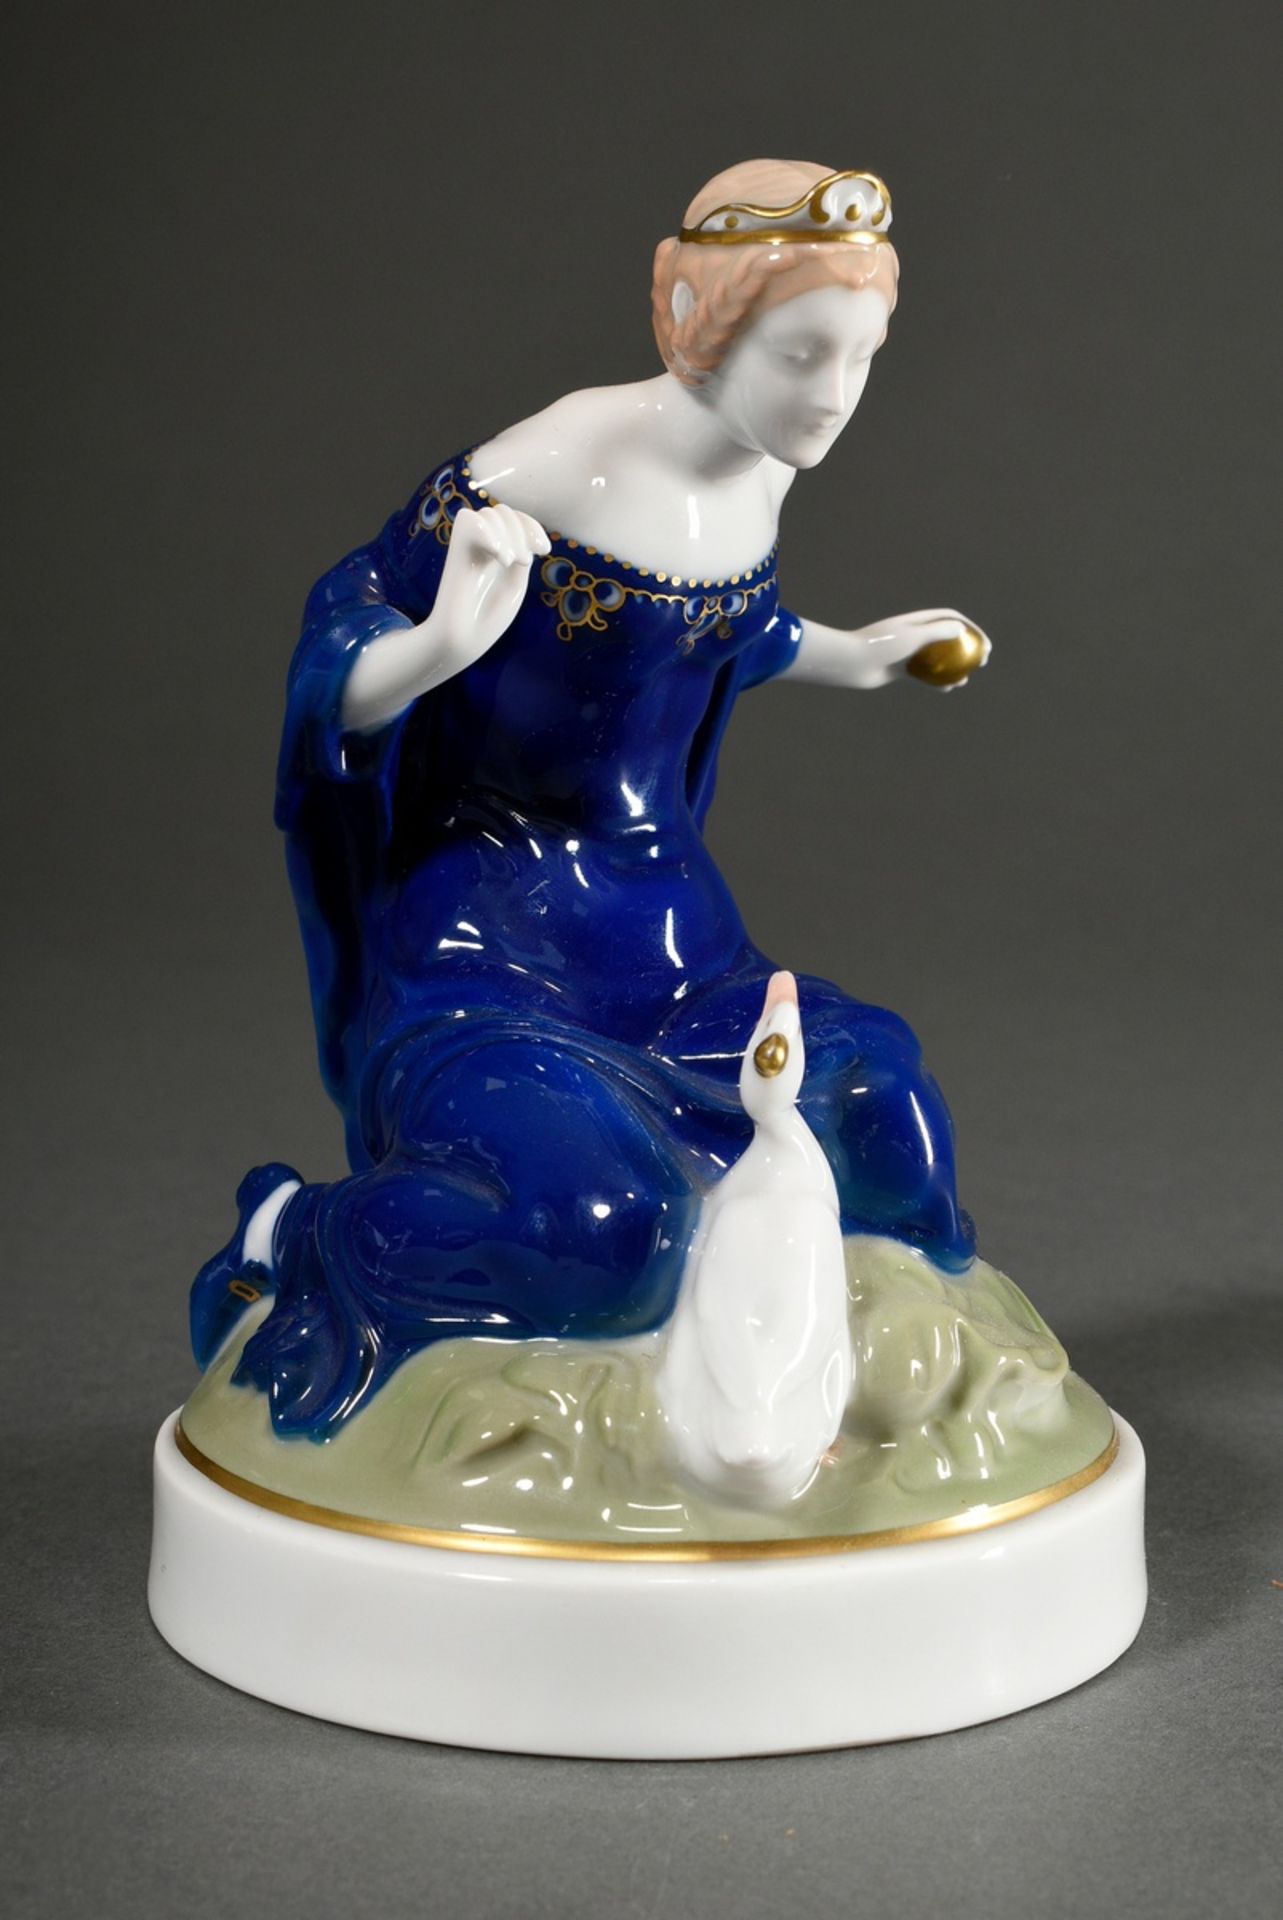 Rosenthal Selb Bavaria porcelain figurine "Princess with golden ball and goose", polychrome painted - Image 2 of 5